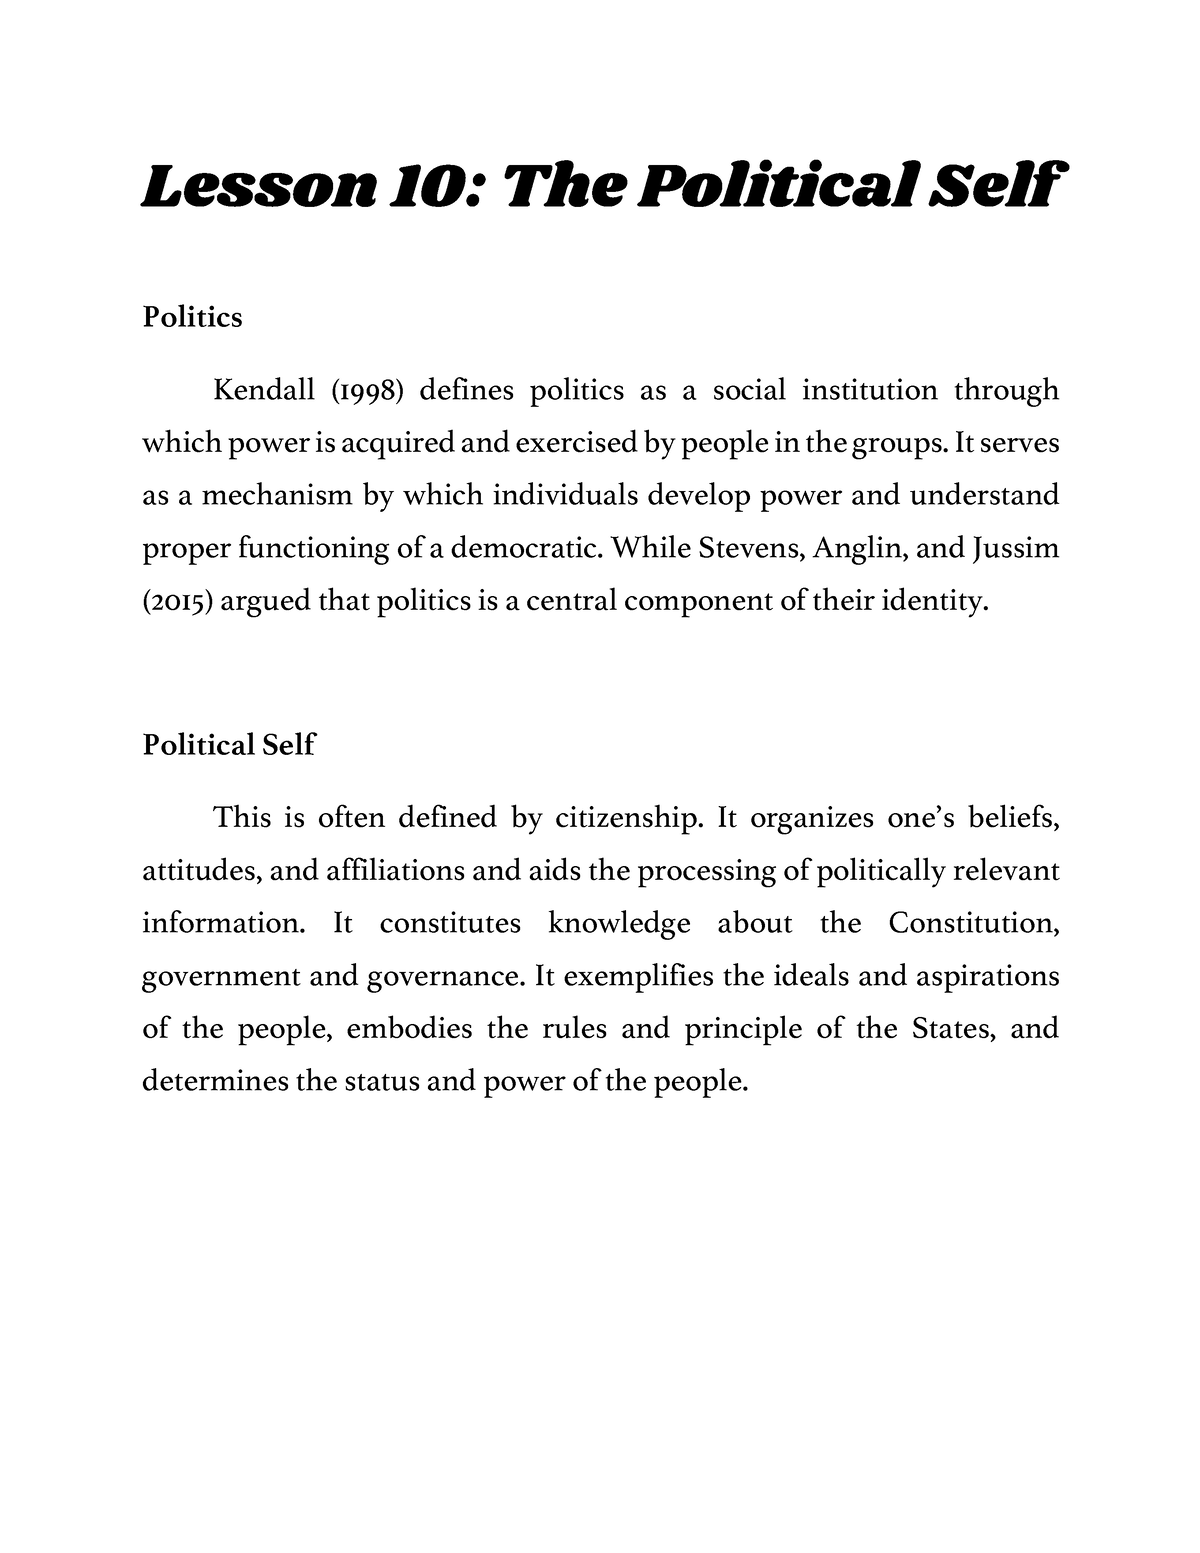 the personal is political essay